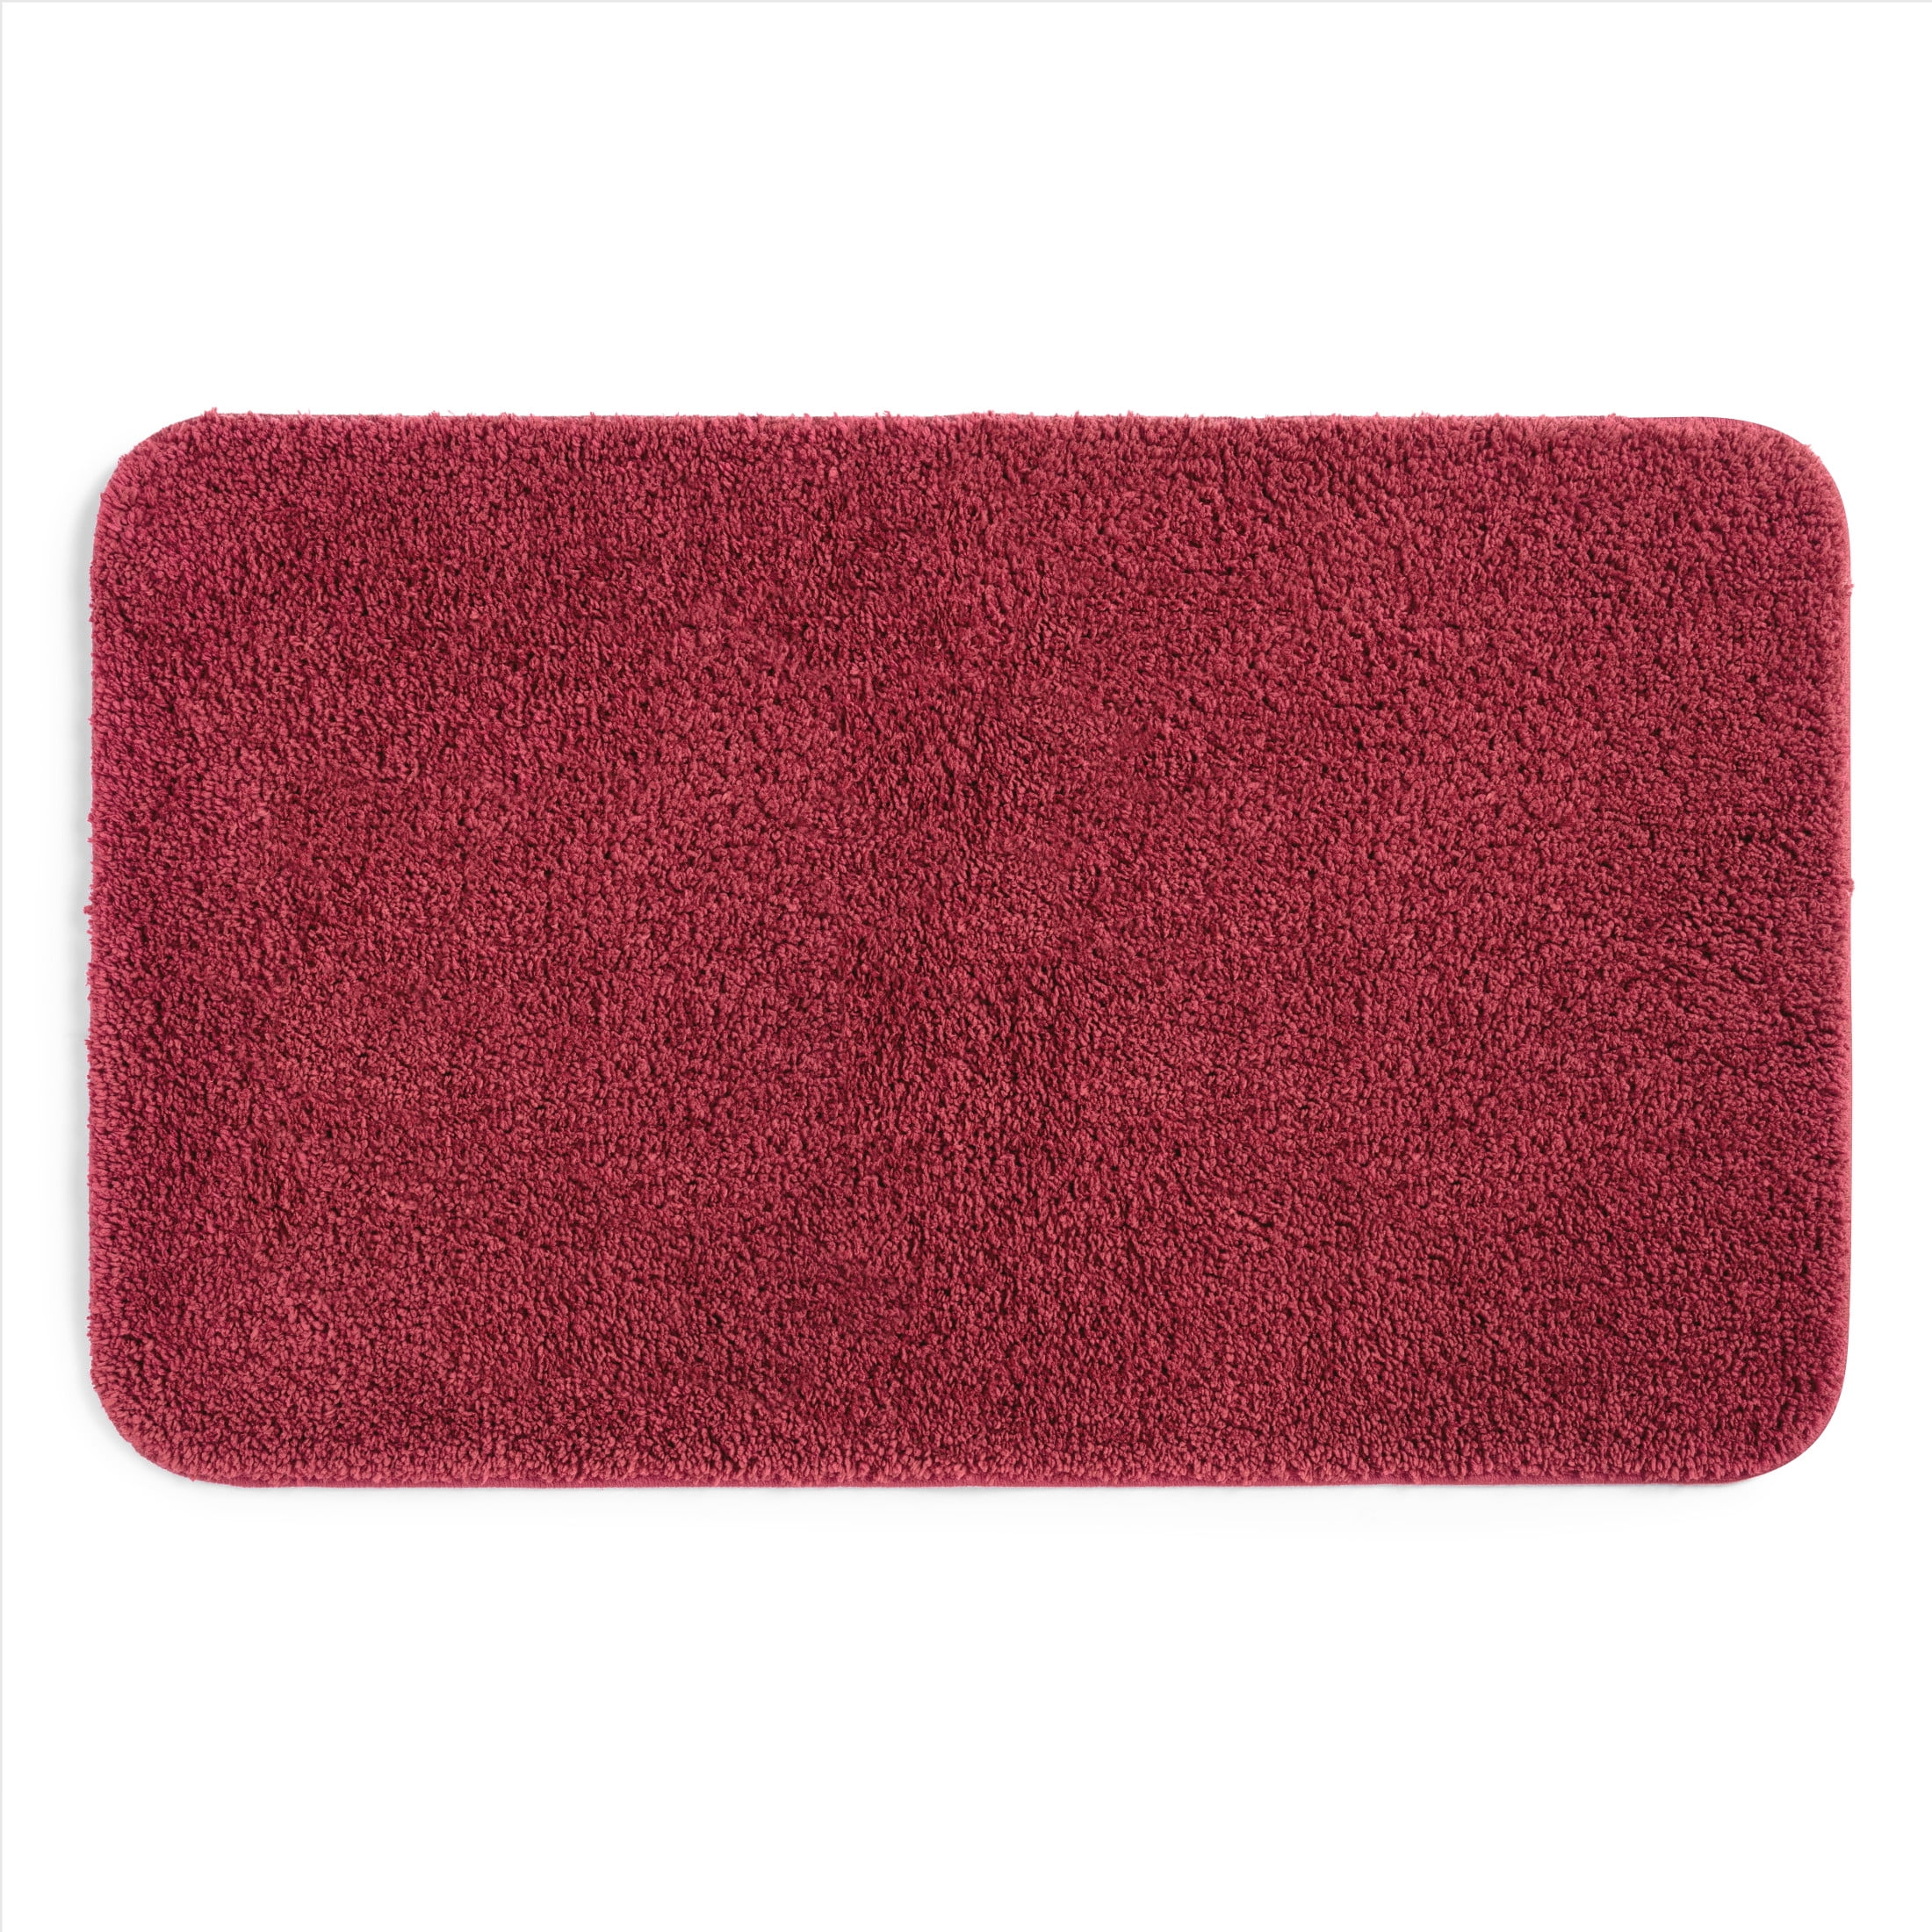 Mainstays Polyester Skid Resistant - Red - 24 x 40 in